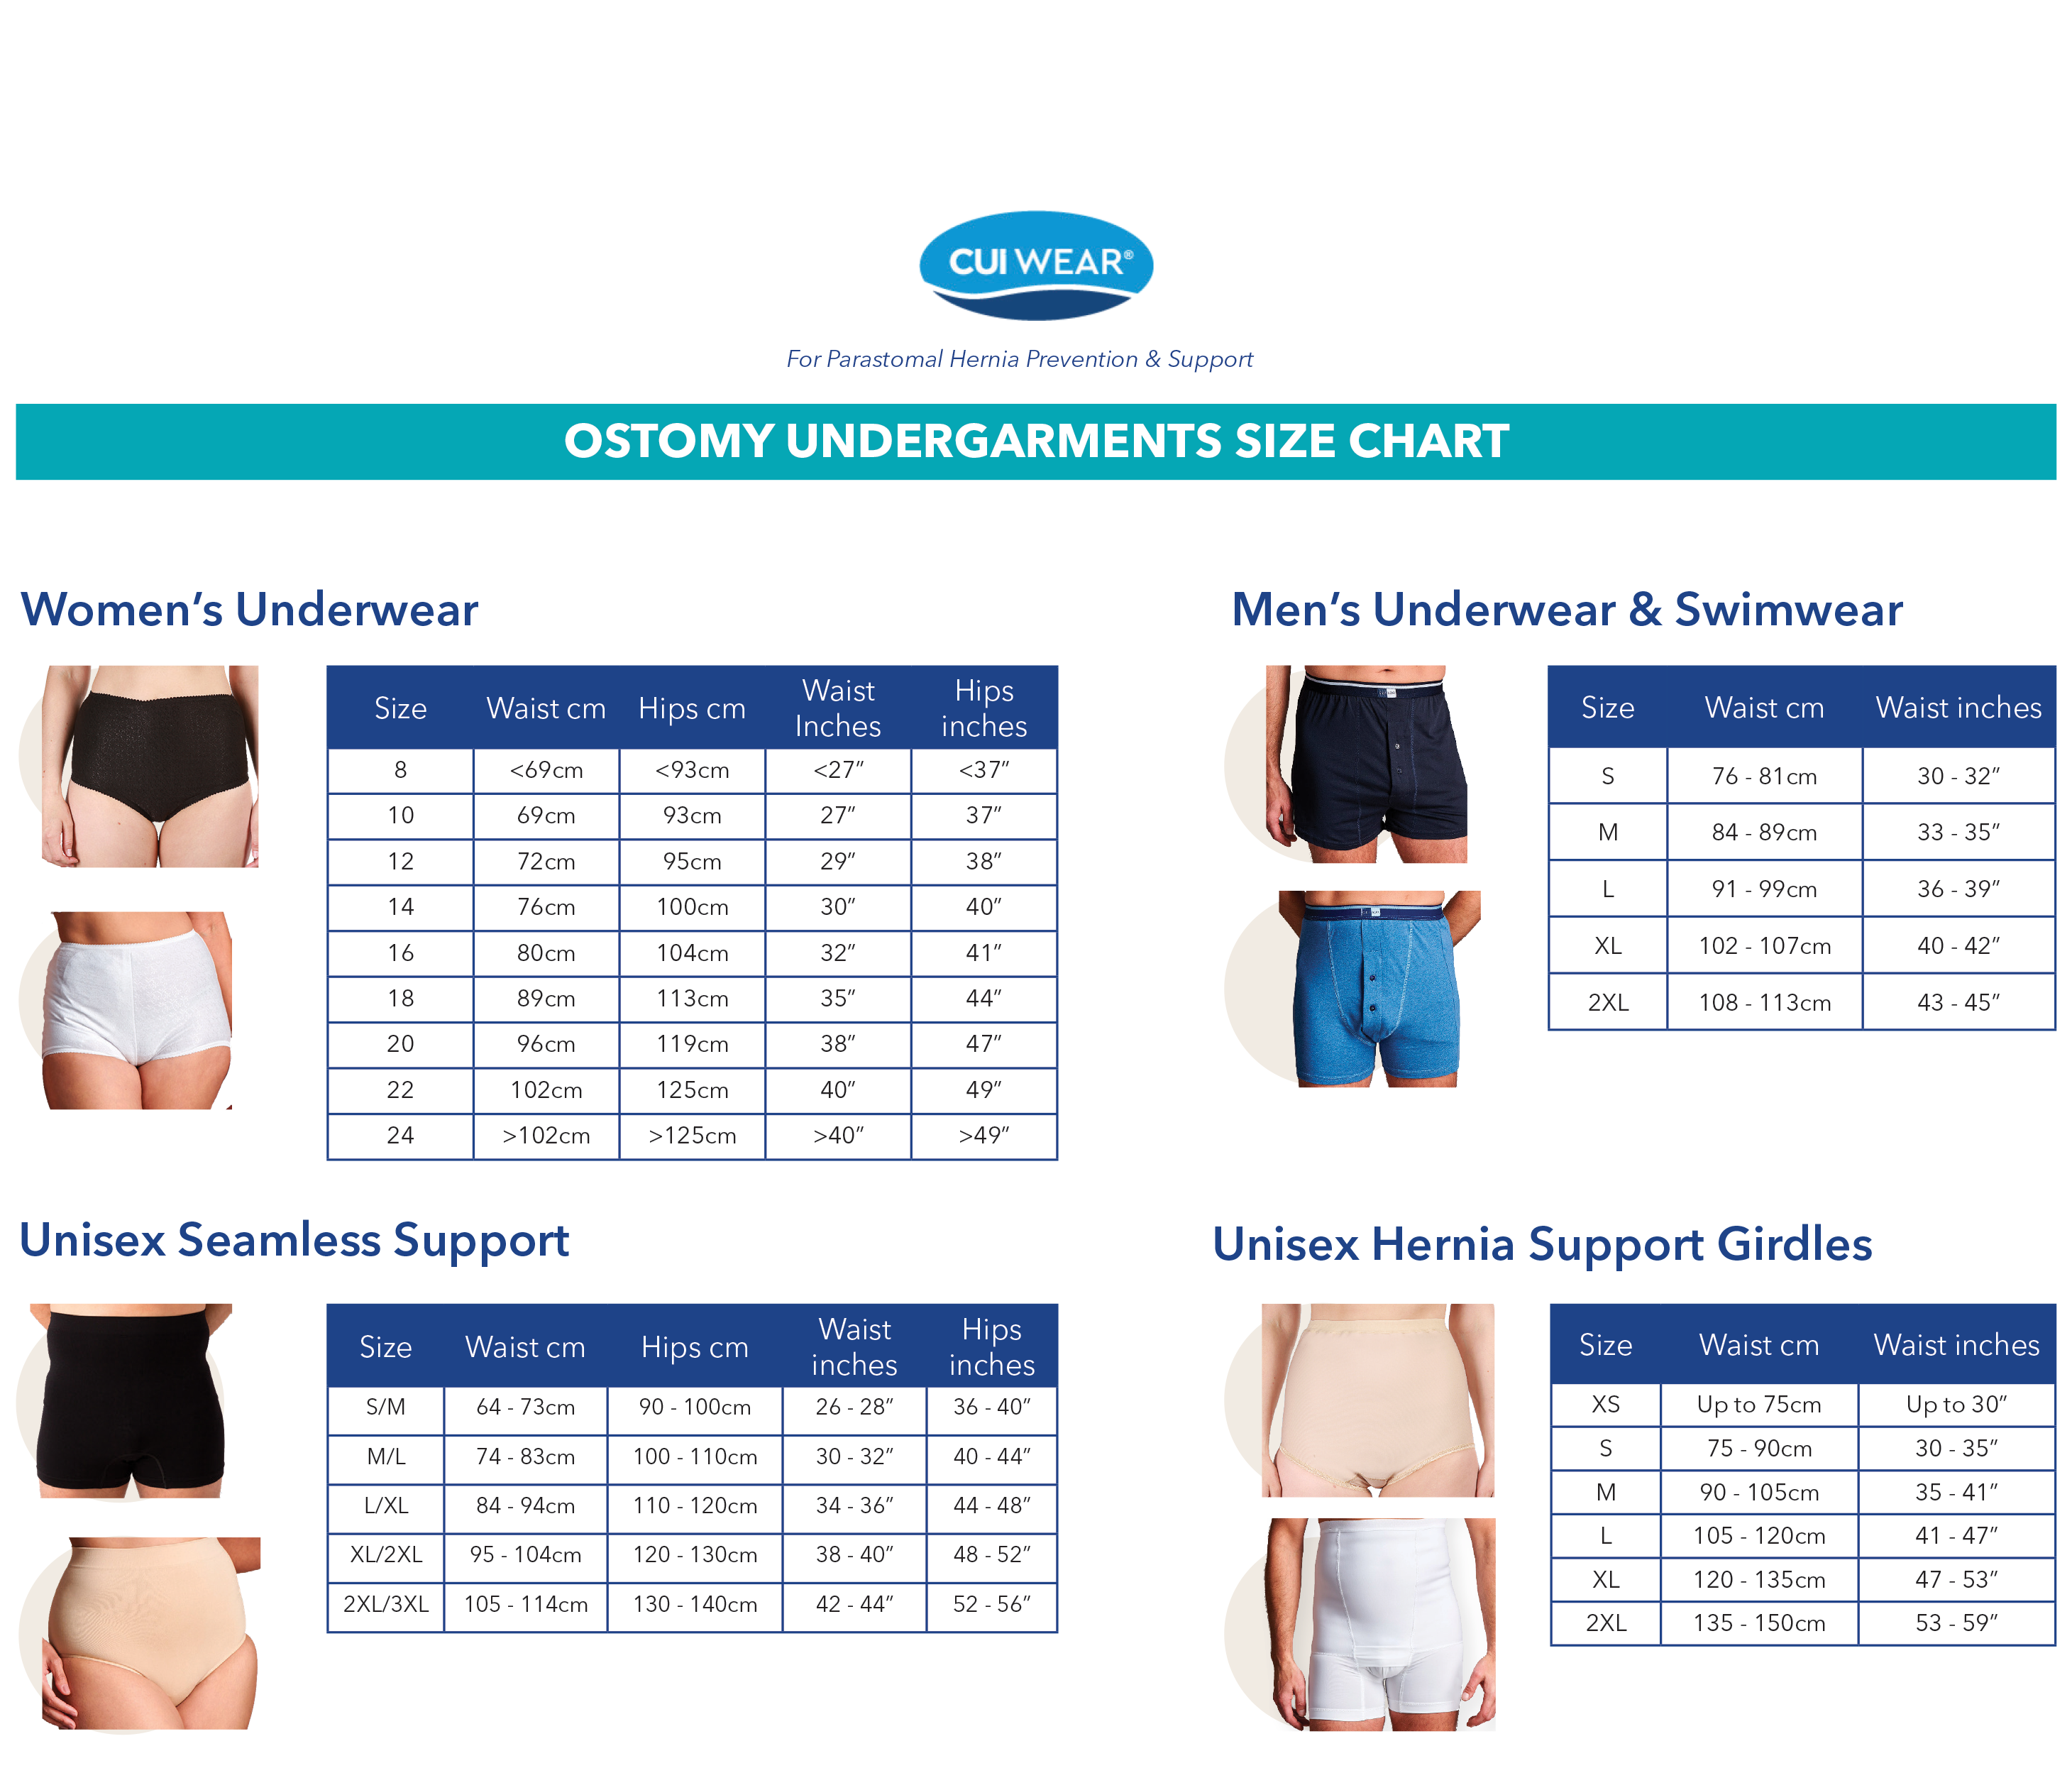 CUI Mens Hernia Low Waist Support Girdle With Legs - 1 each, XLARGE, WHITE